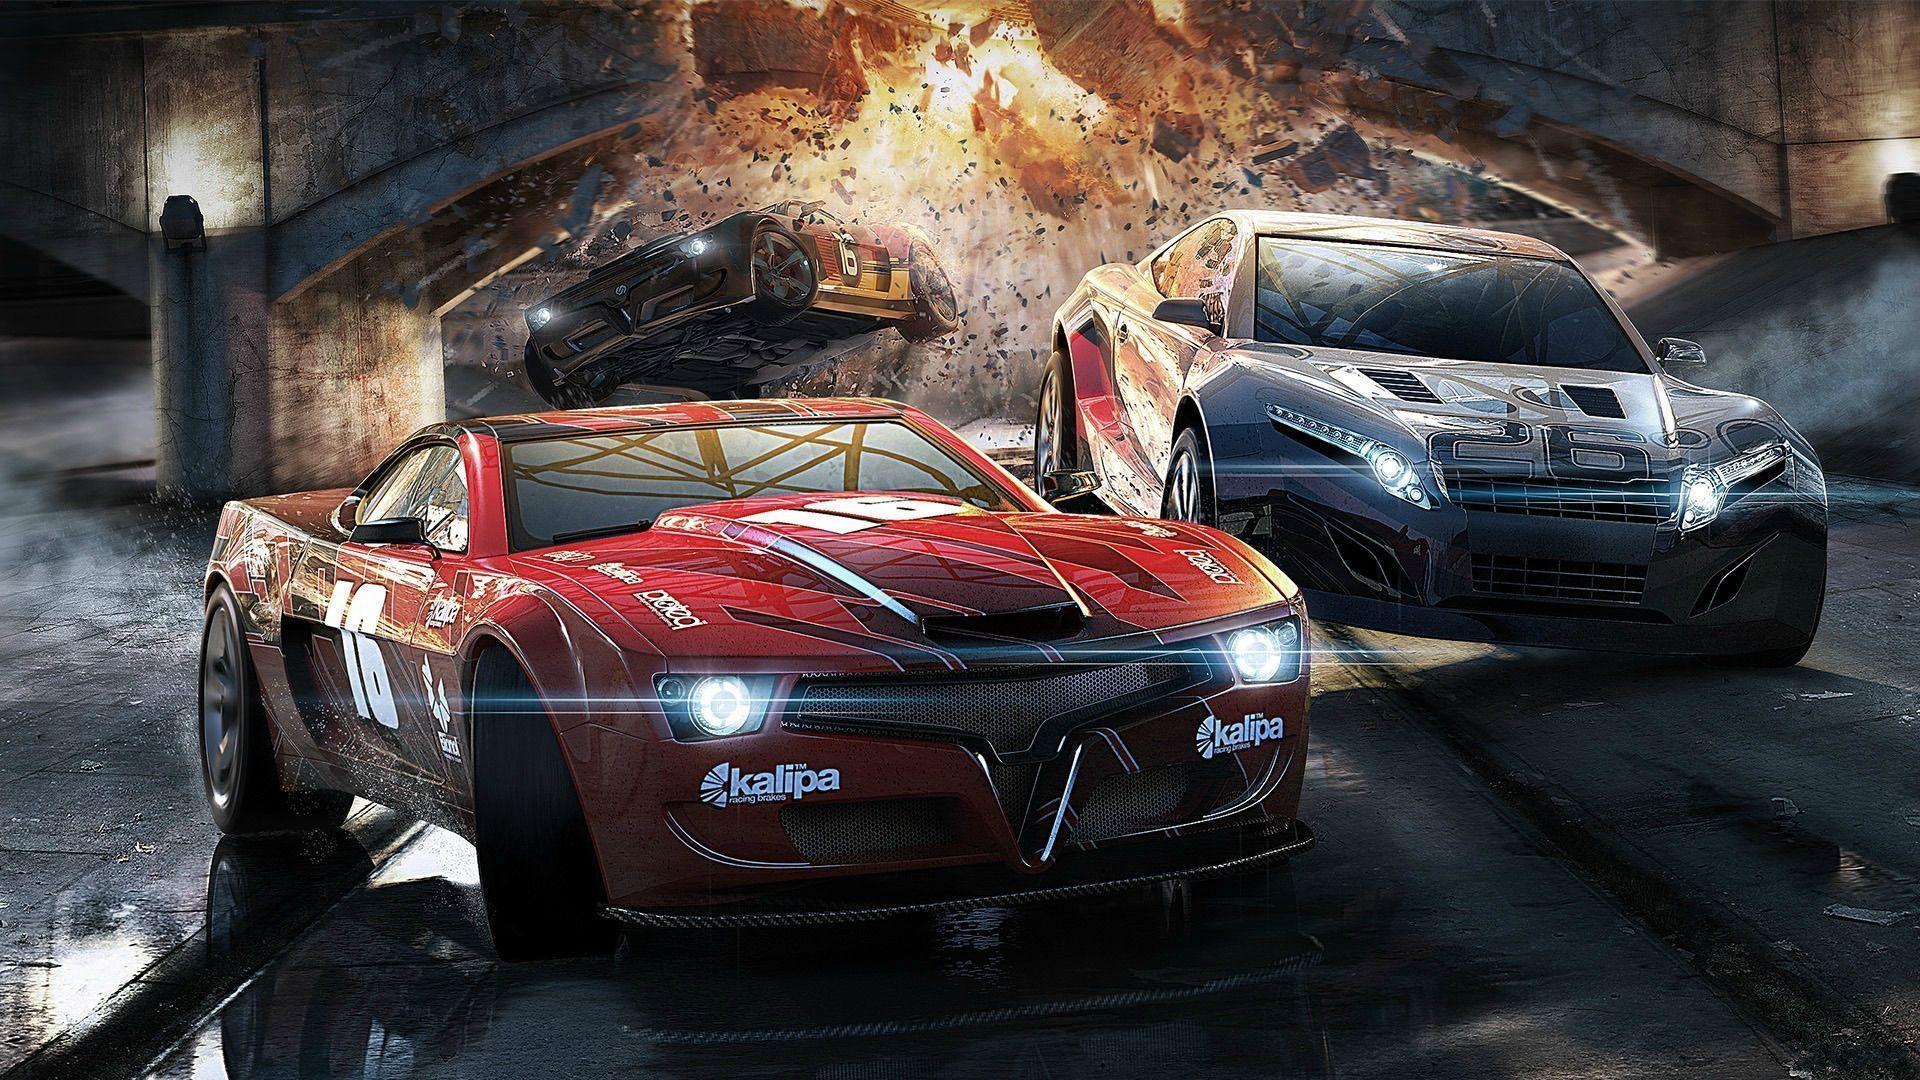 Street racing. cars. picture and wallpaper for desktop